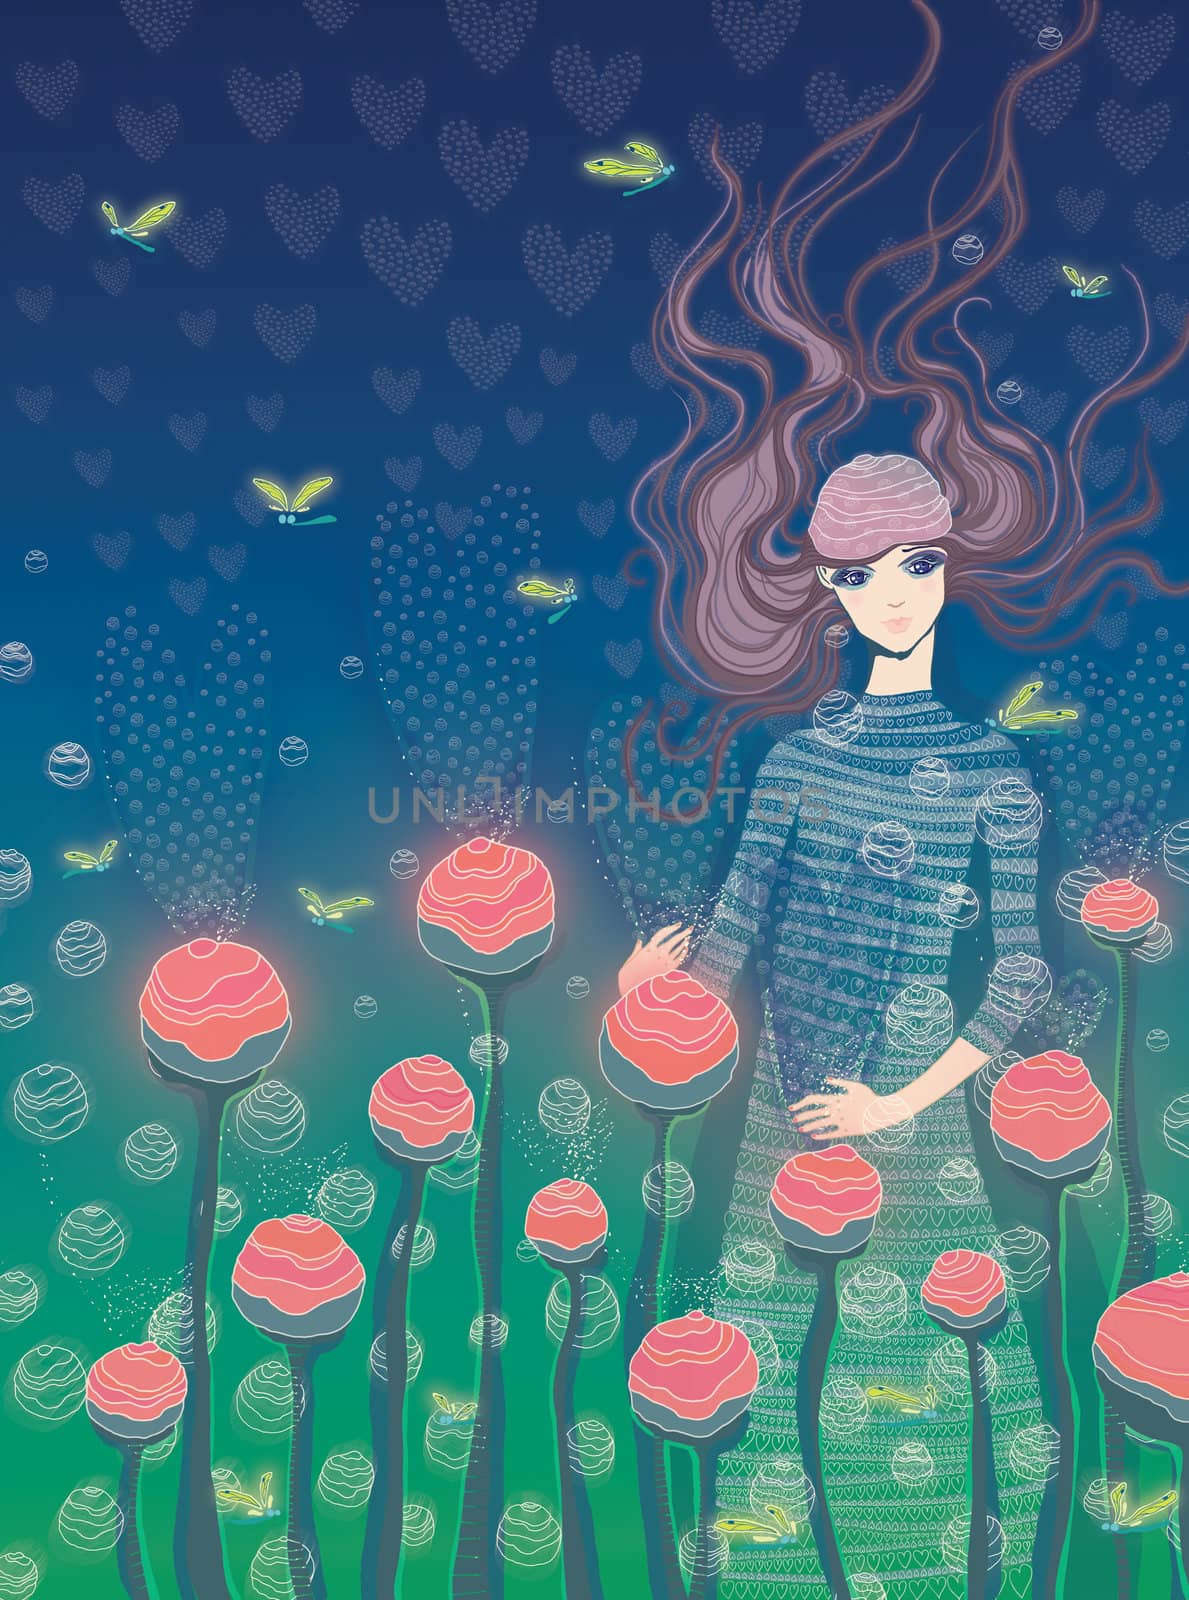 The beautiful girl carefully looks after gentle buds of colors. raster illustration.